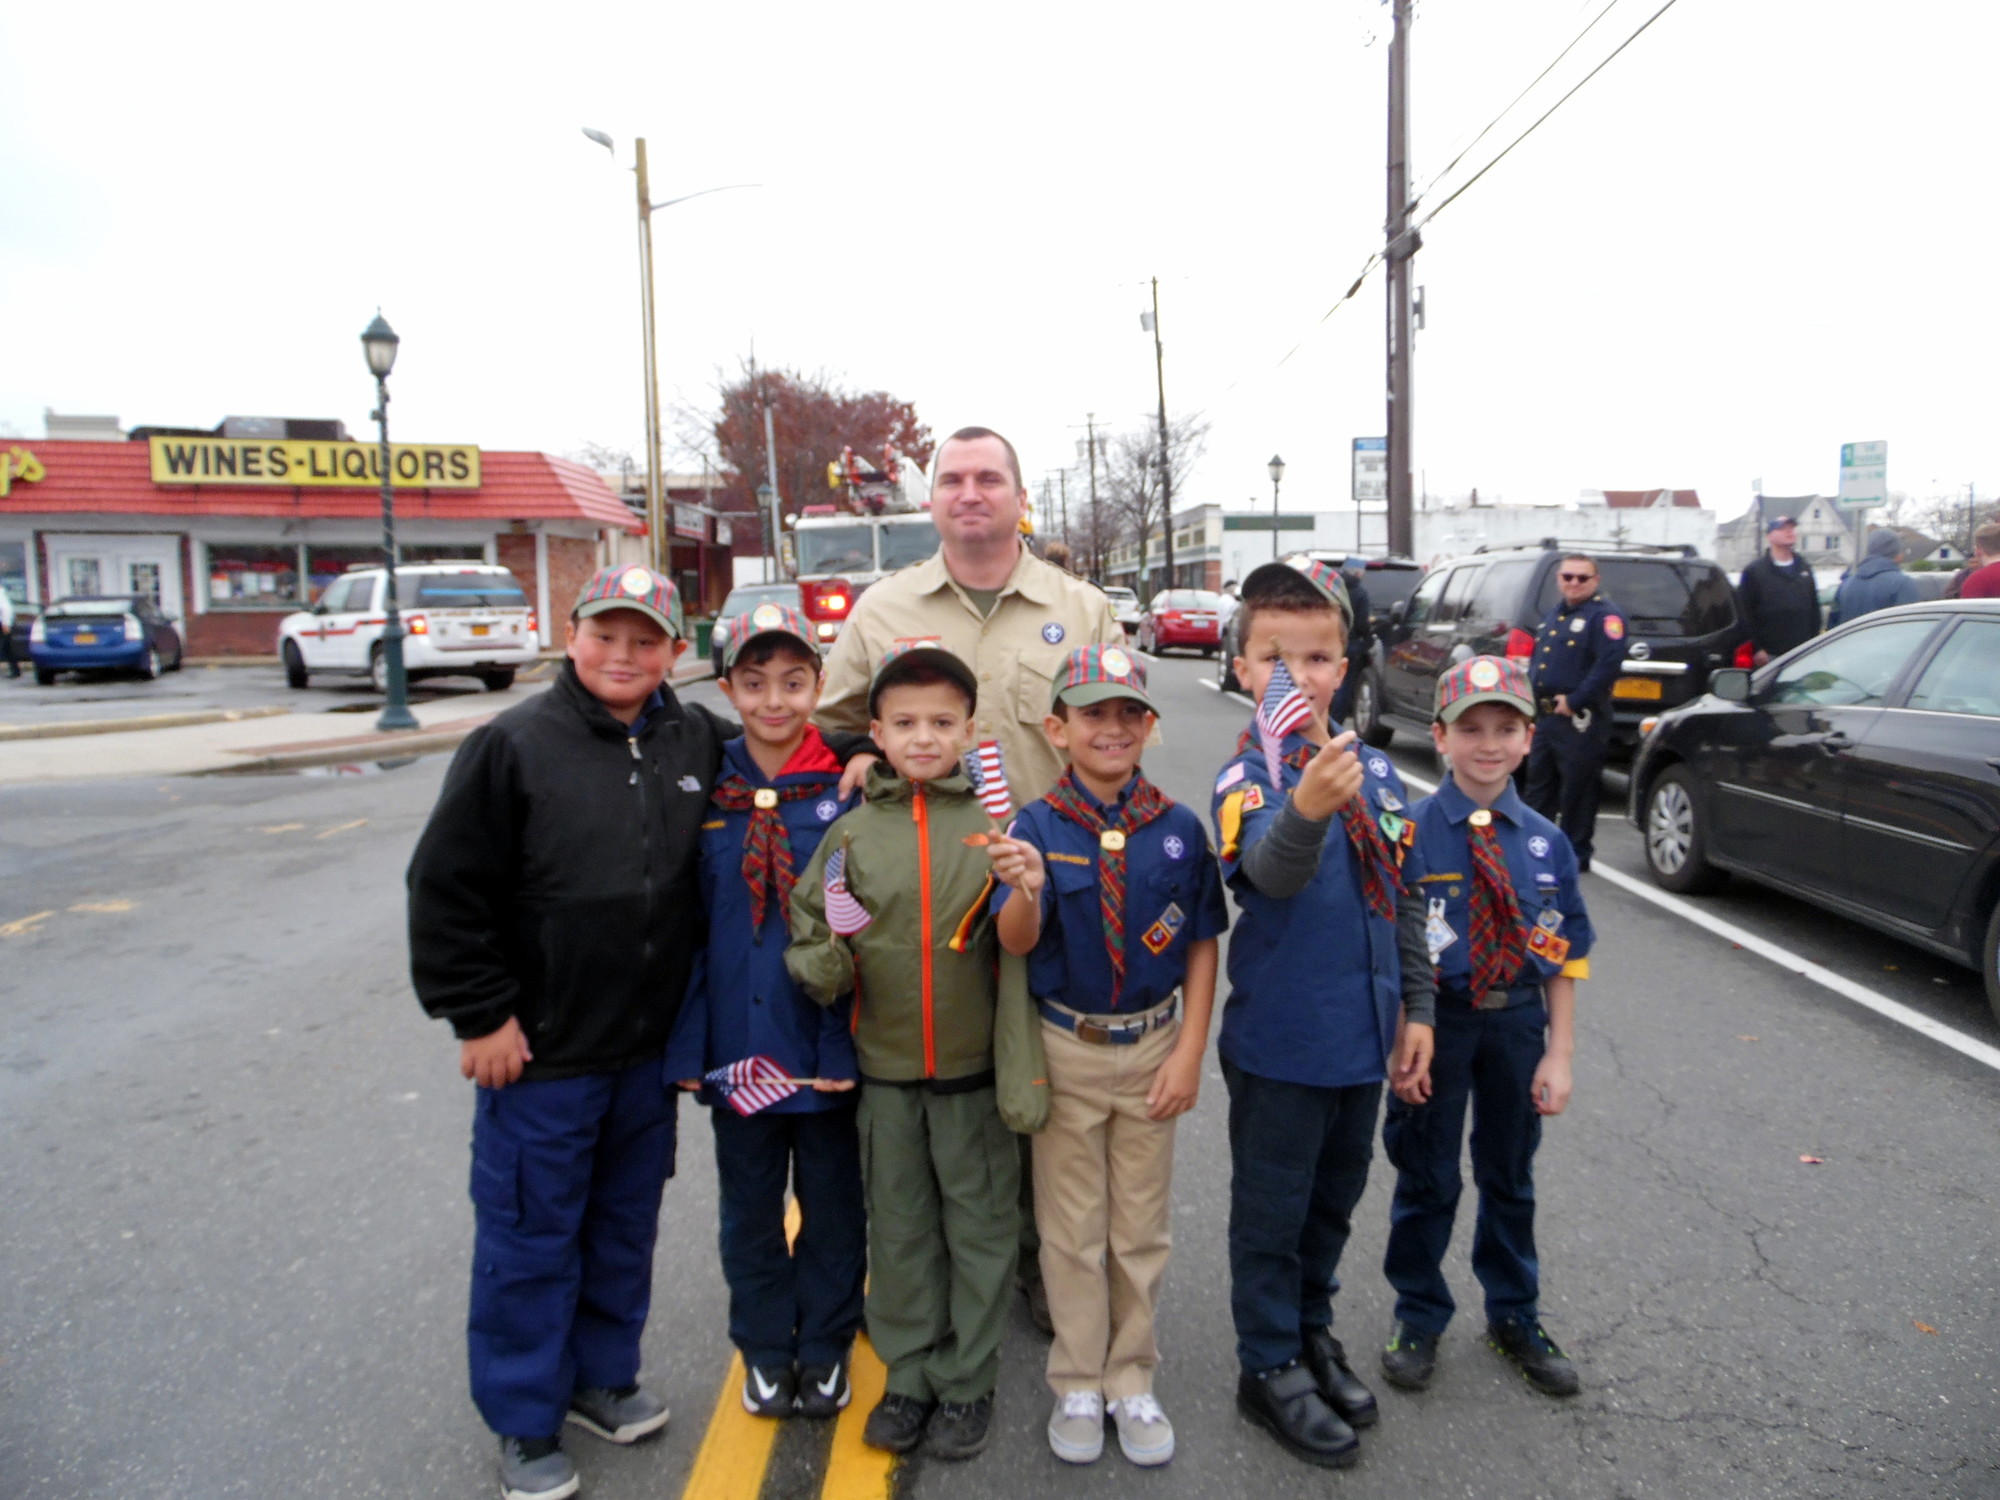 In East Rockaway, members of Pack 84 attended the ceremony with their leader, Peter Chjonacki. The cub scouts were, from left, Joseph Romano, Nick Dilapi, Nick Carradonna, James Abruzzo, J. P. McCarthy and Matthew Chjonacki.